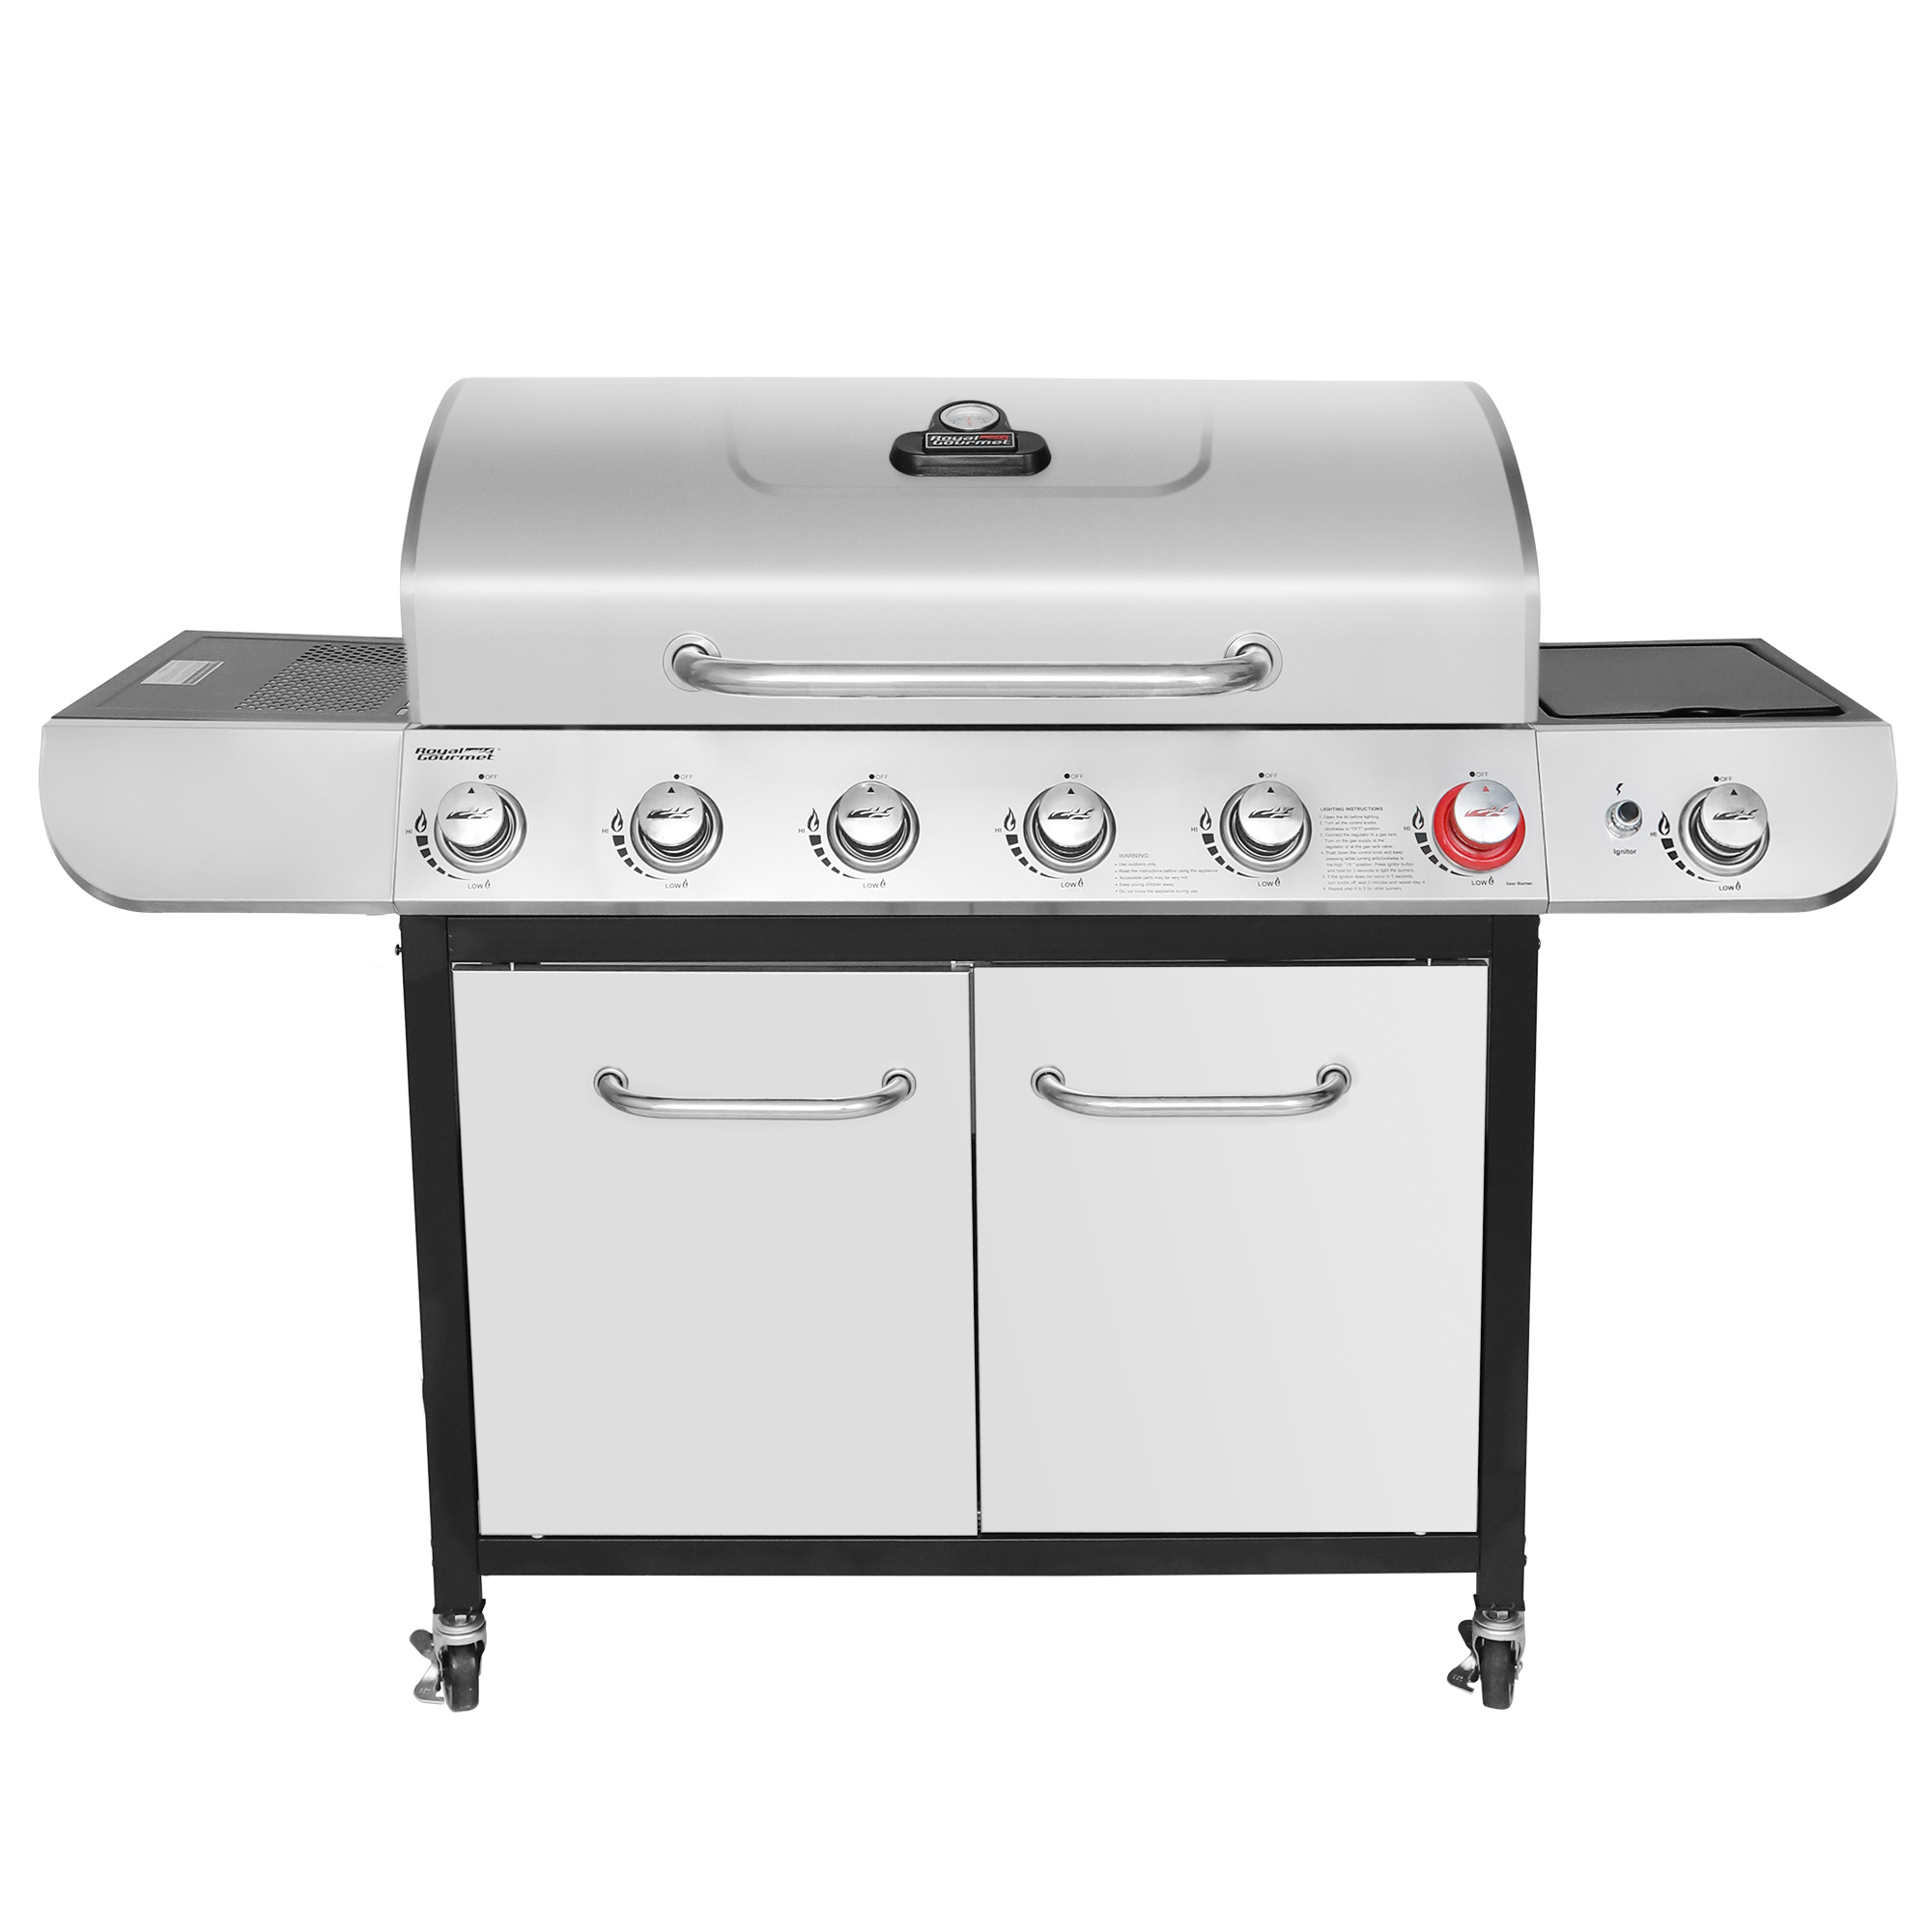 Royal Gourmet SG6002R 6-Burner BBQ Liquid Gas Grill with Sear and Side Burner, 71,000 BTU Cabinet Style Gas Grill, Outdoor Patio Garden Grill, Stainless Steel, Silver - image 1 of 8